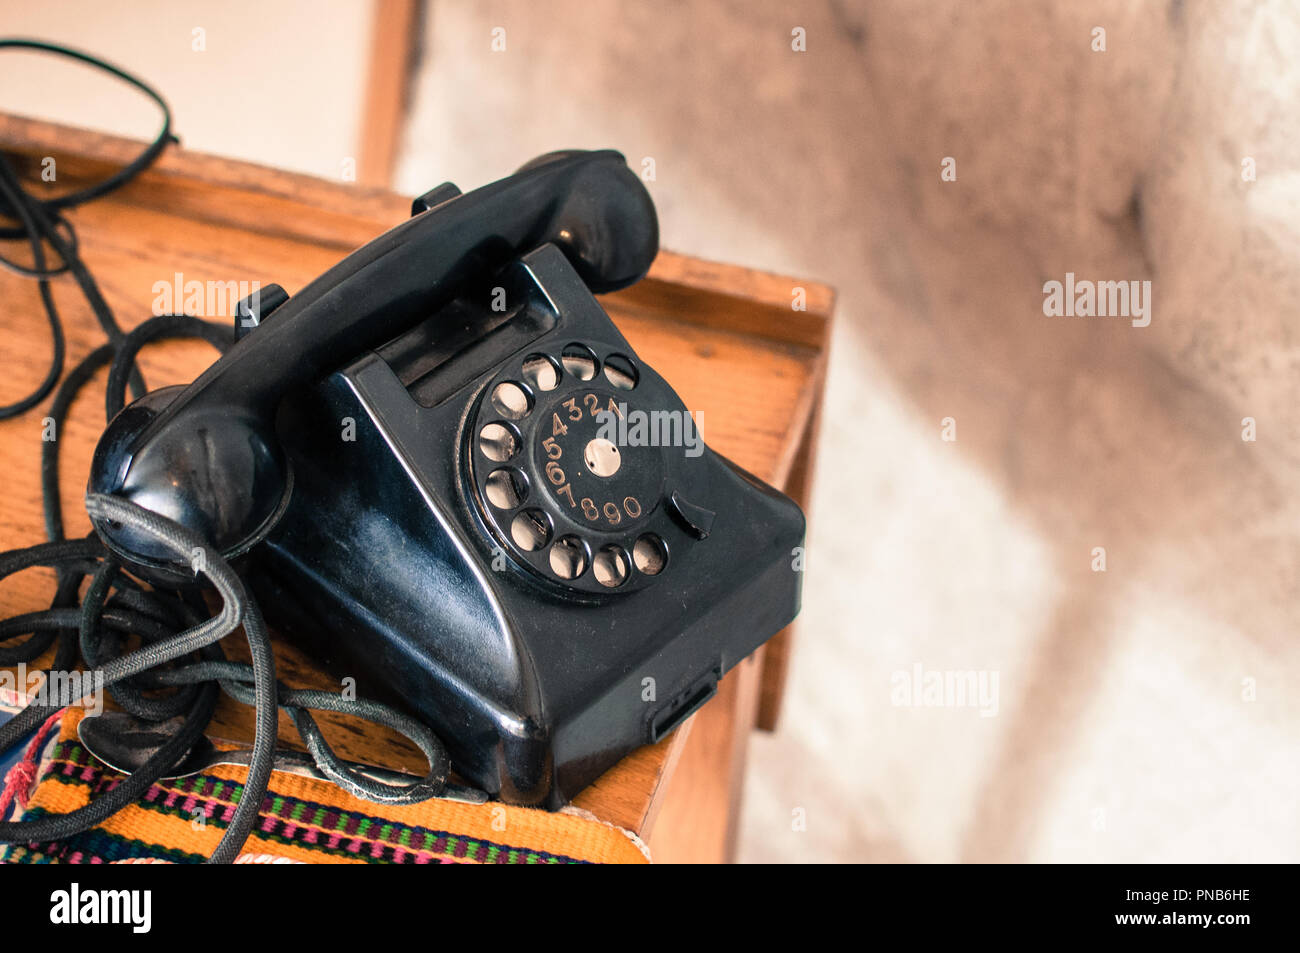 Old fashioned black telephone in retro/vintage style from long gone era Stock Photo